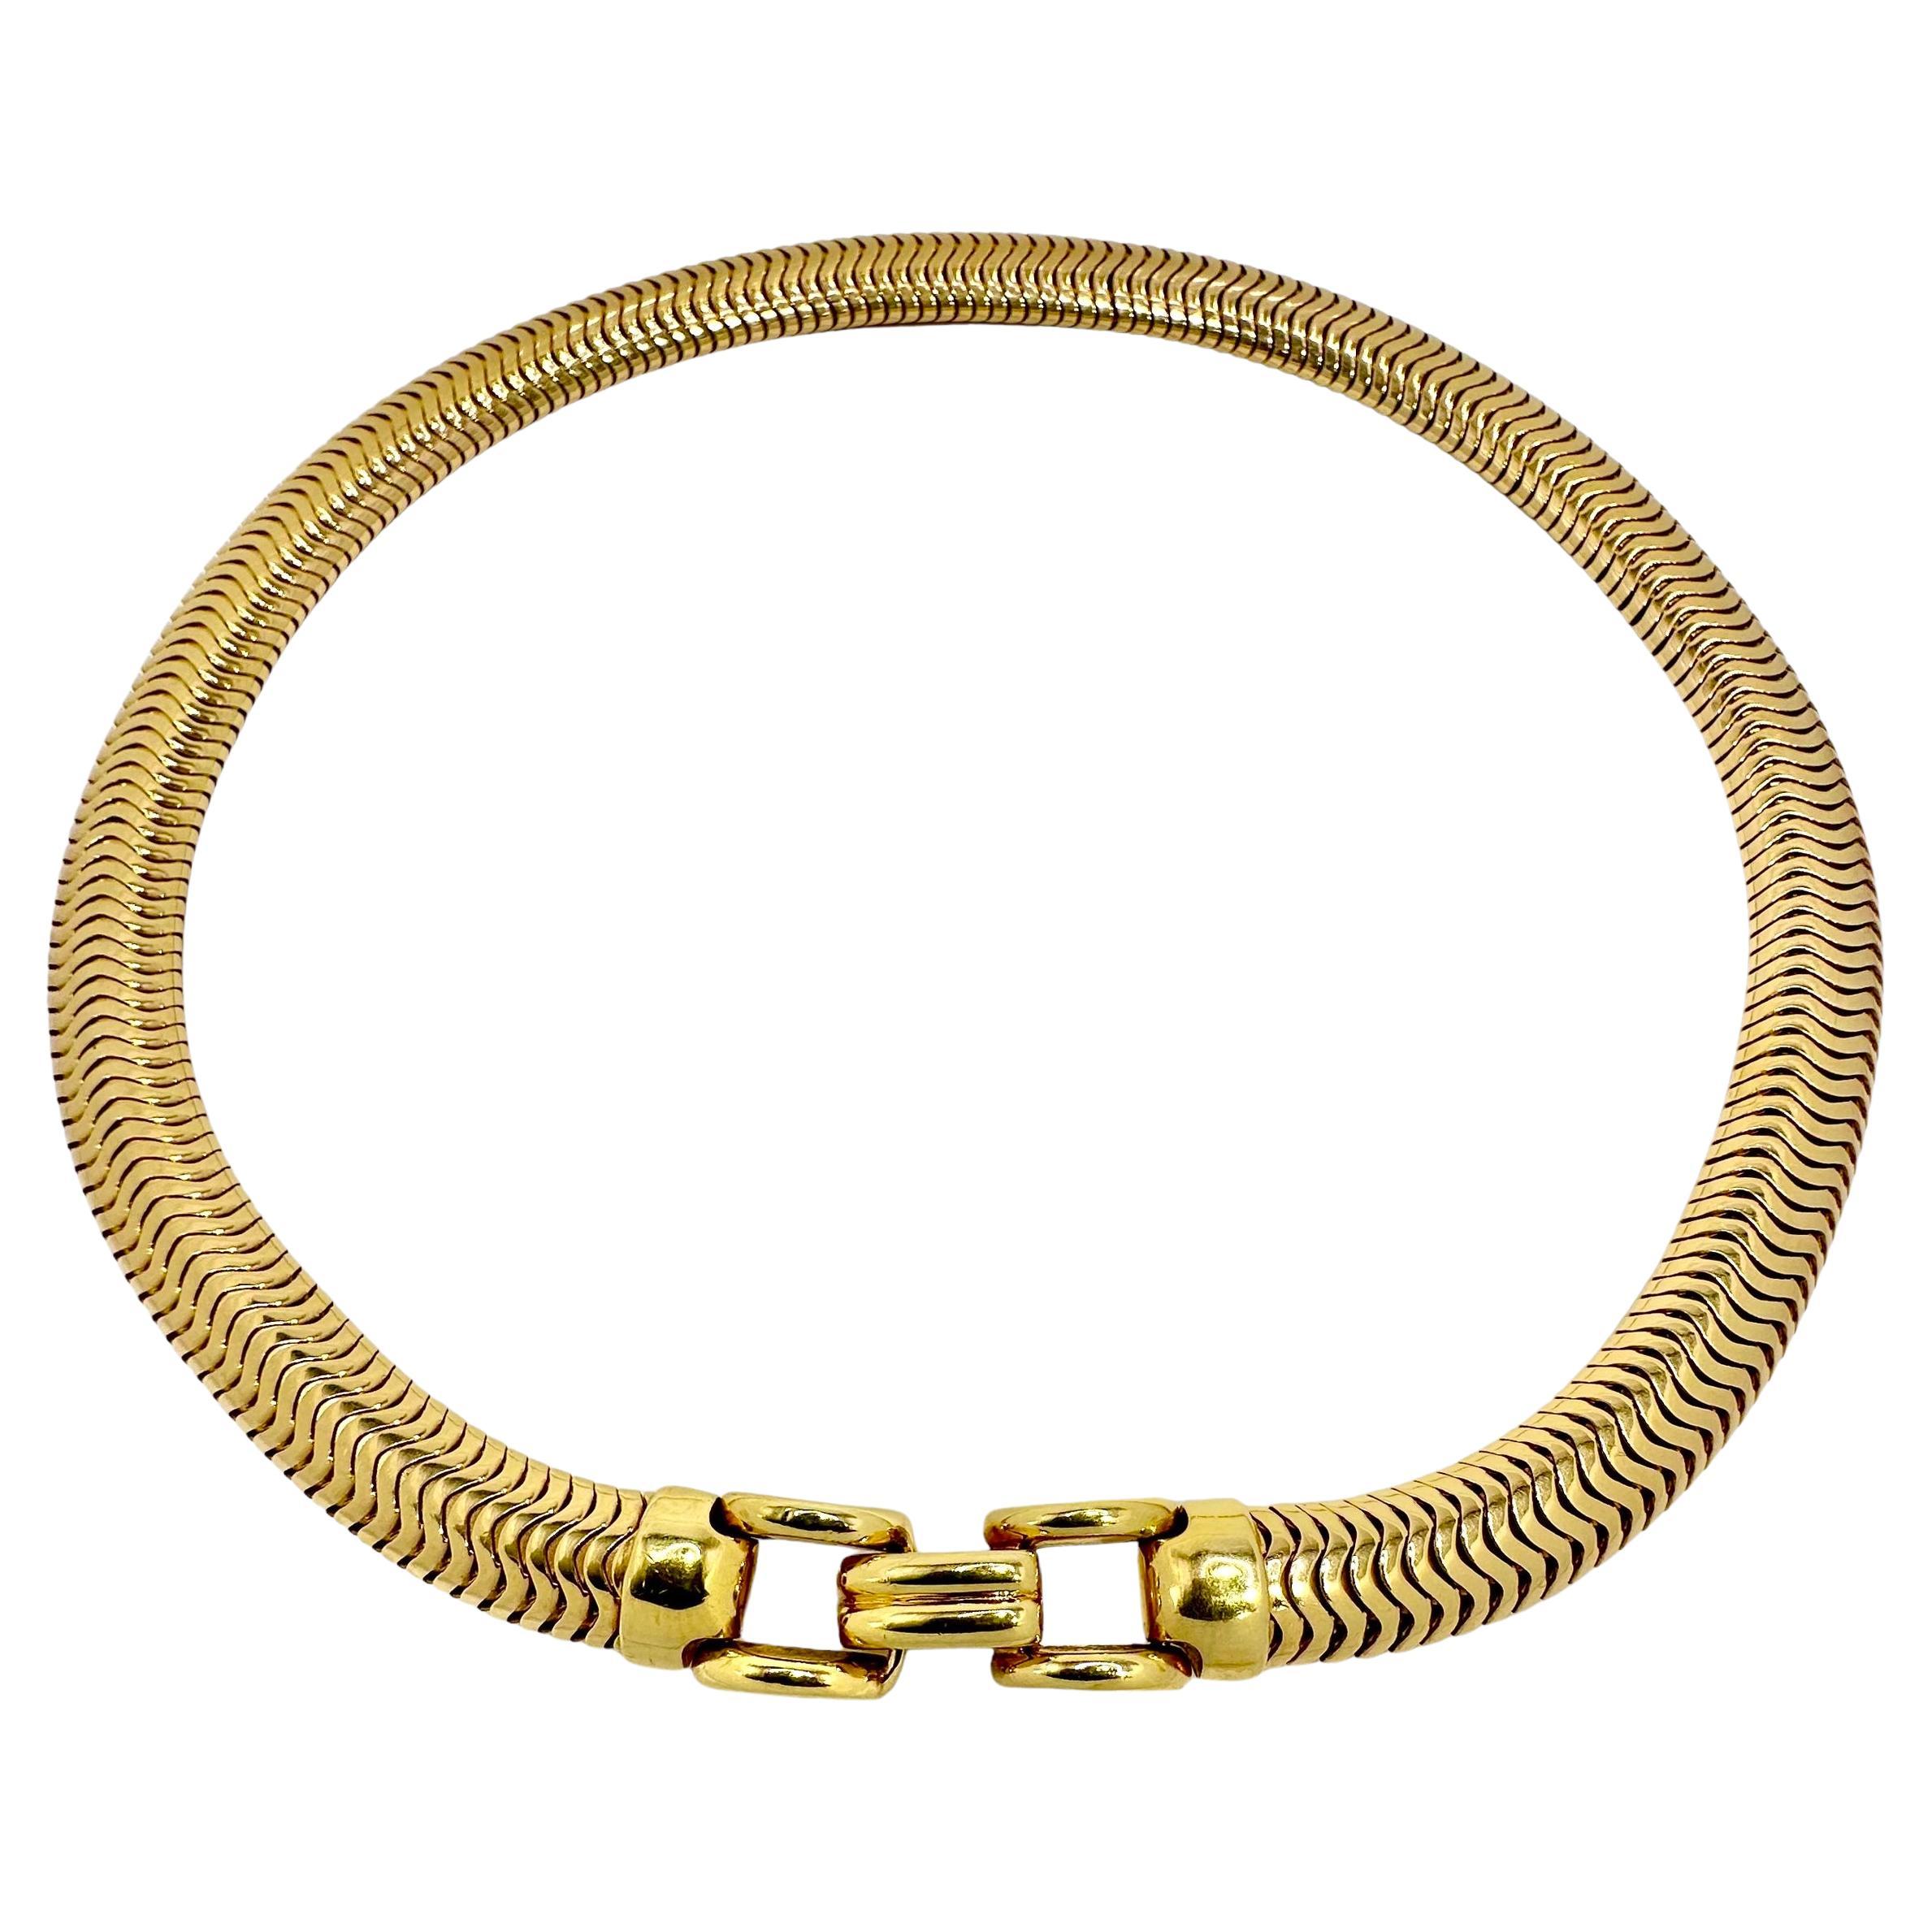 Retro Period Cartier Snake Link Choker Necklace in 14k Yellow Gold